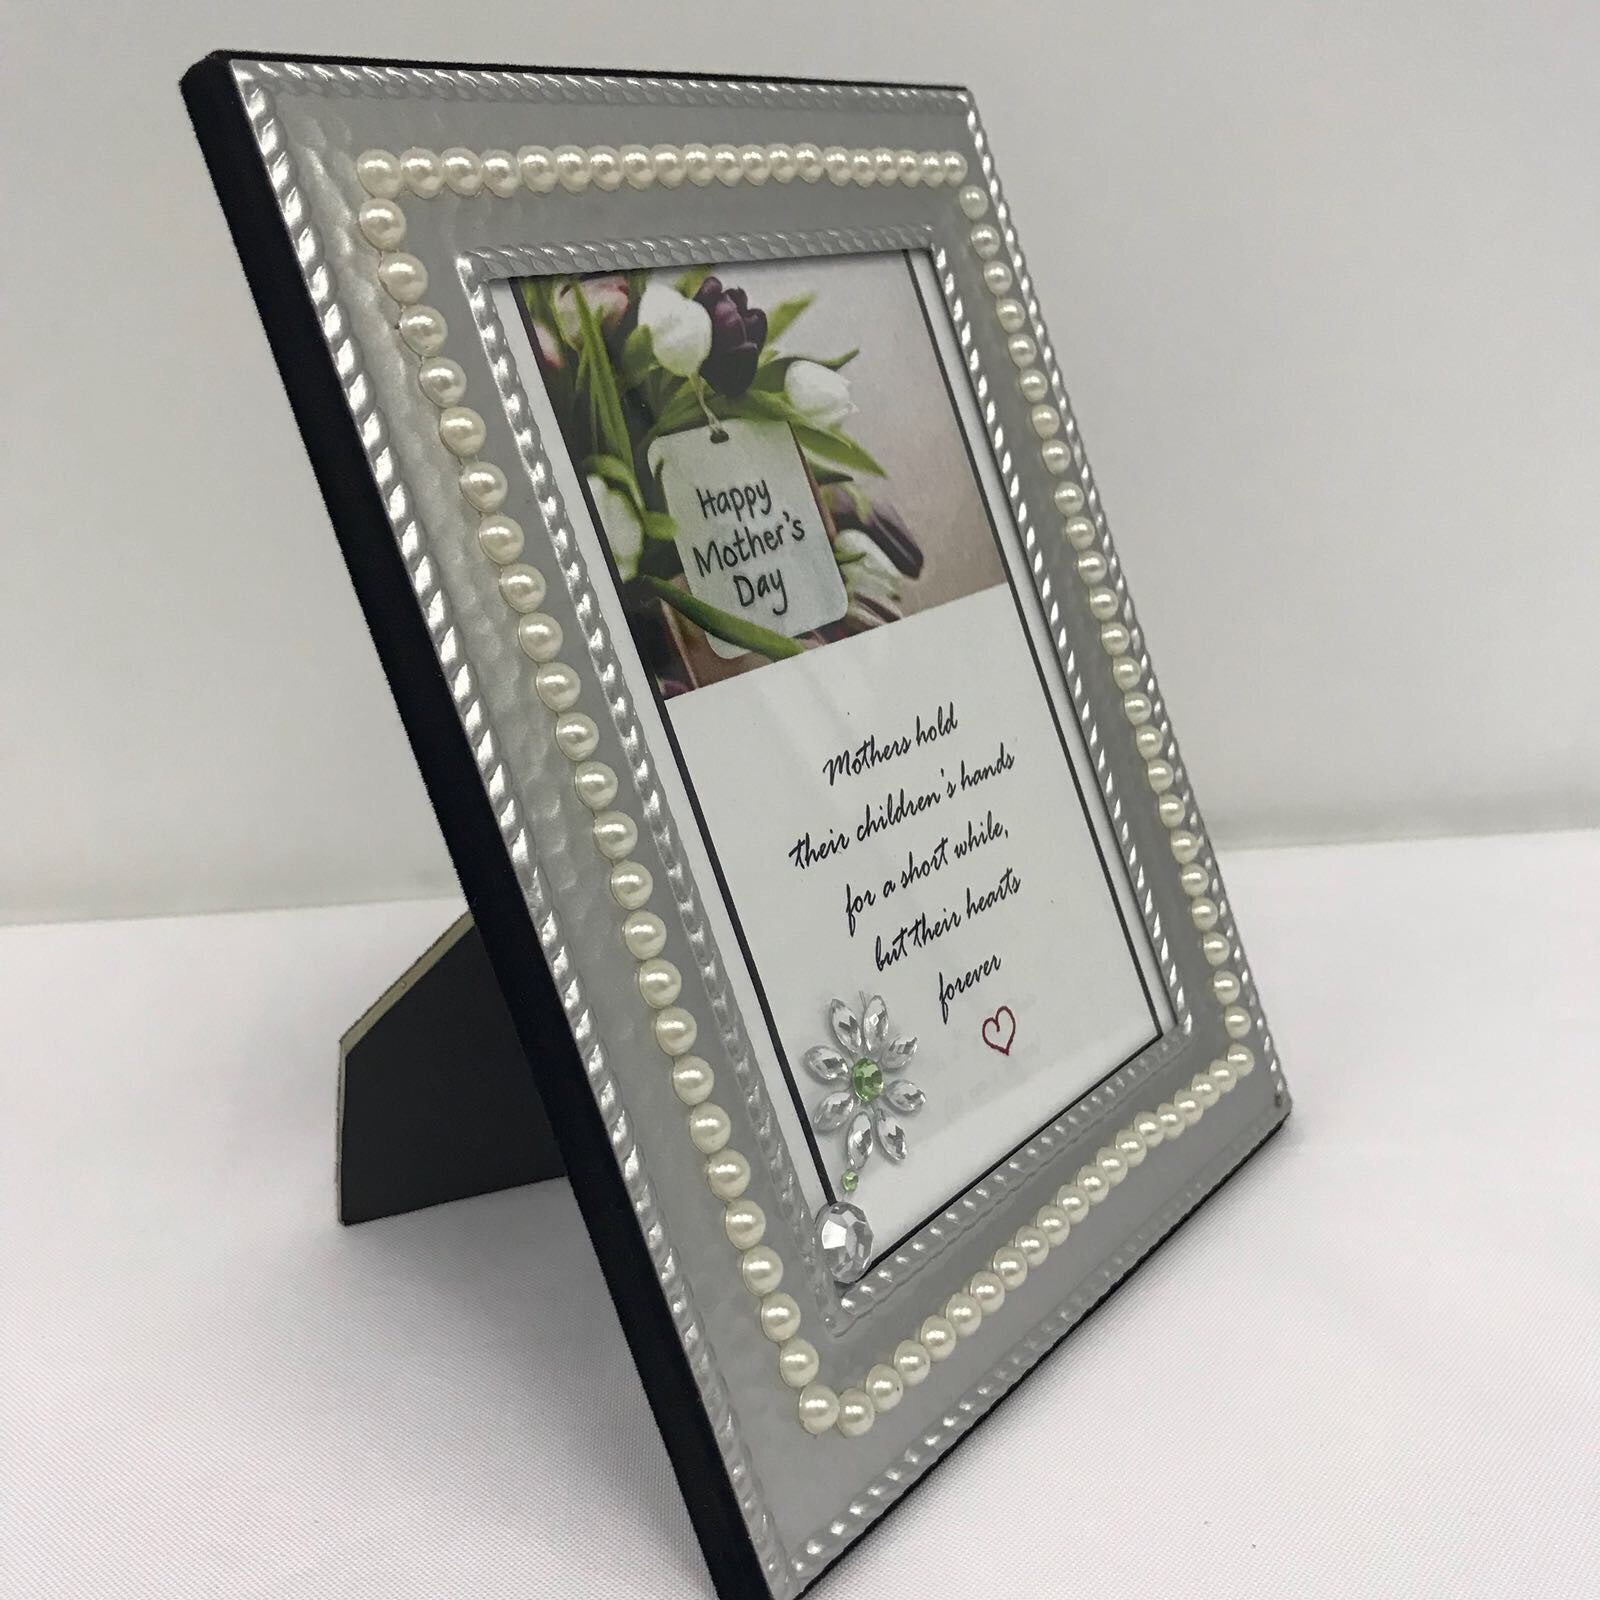 DIY Mother's Day Photo Frame